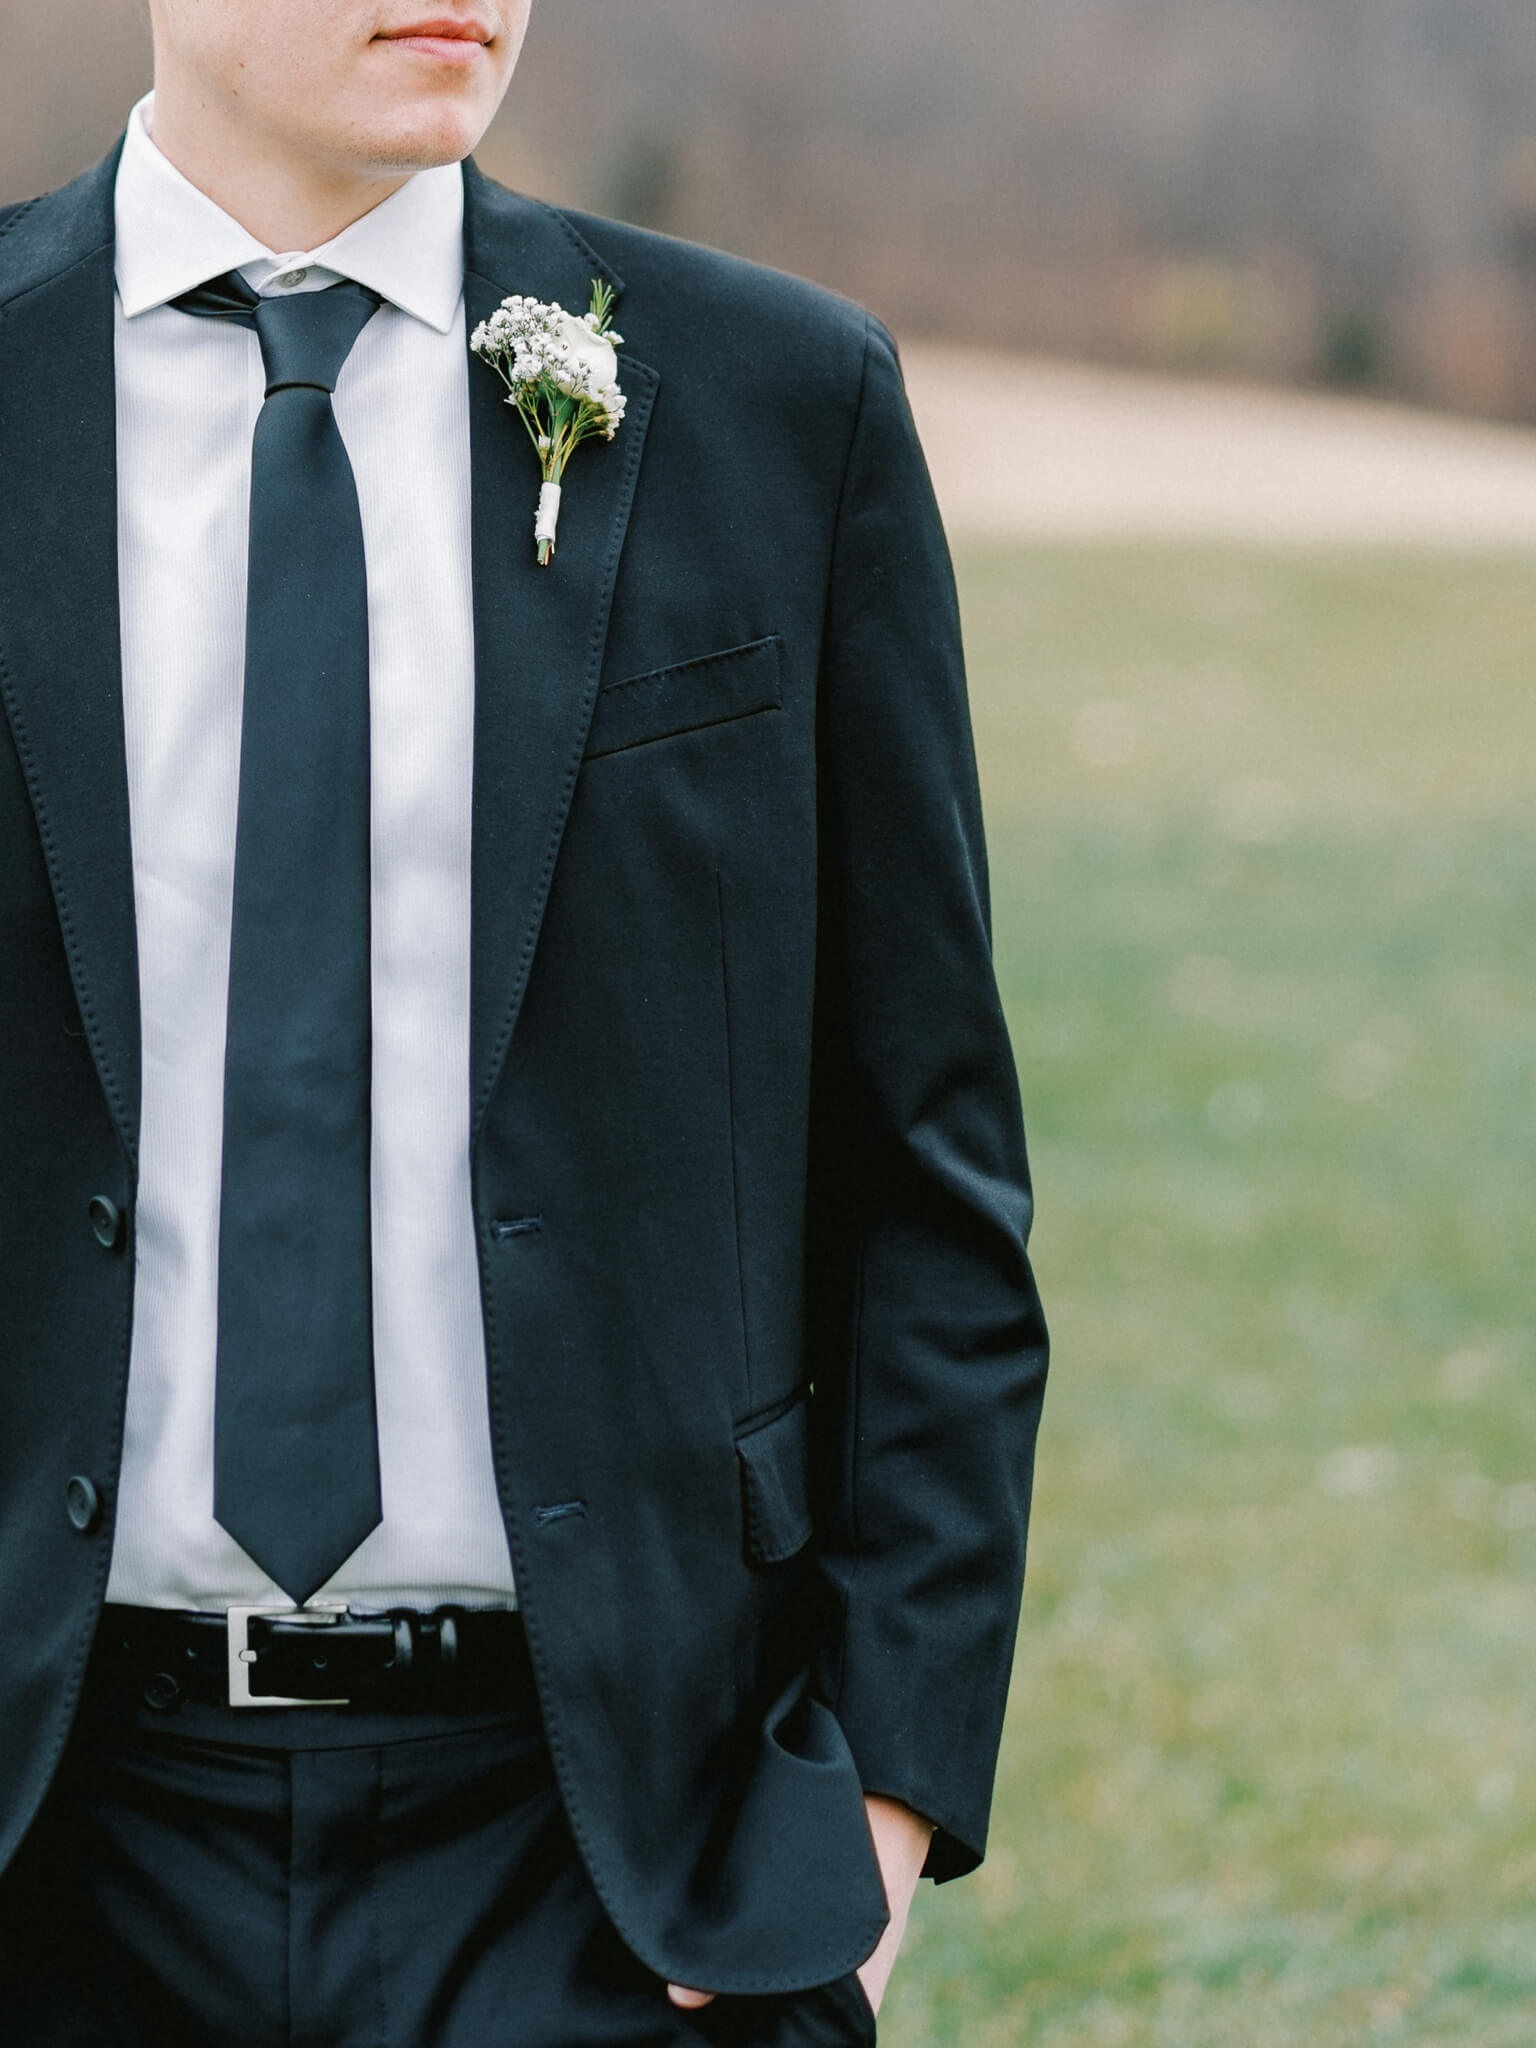 Close-up of a groom's black suit and tie and his white boutonnière.